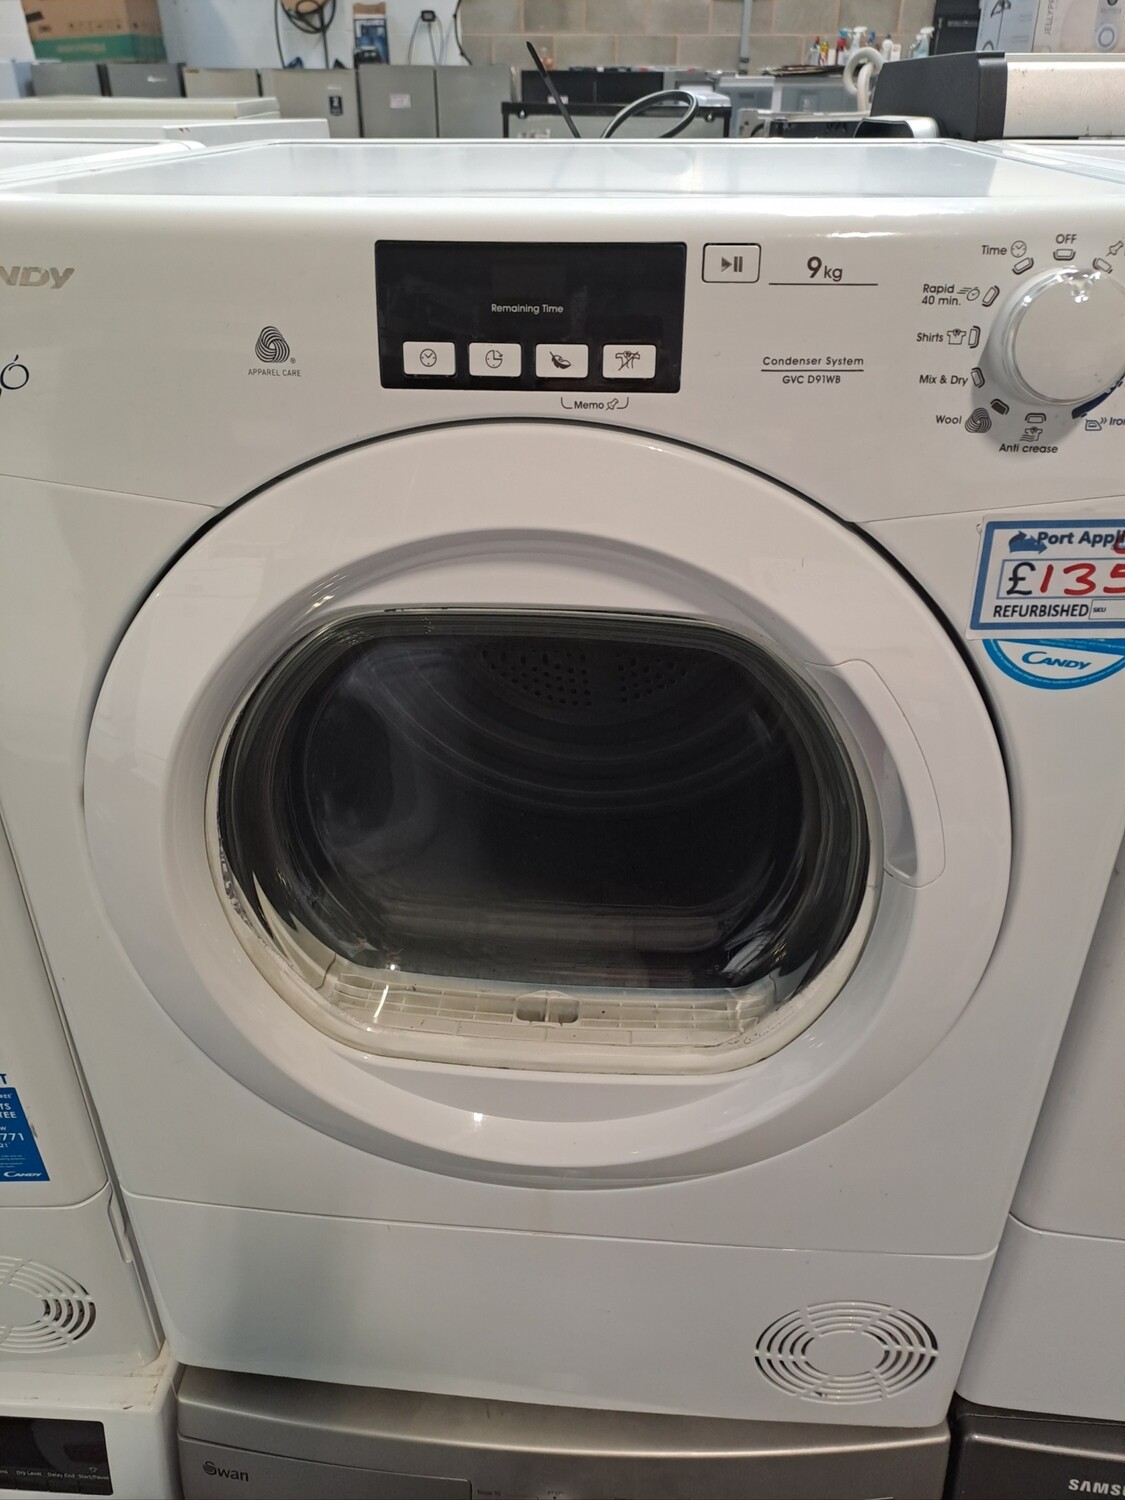 Candy GVCD91WB 9kg Condenser Dryer White Refurbished 6 Months Guarantee 